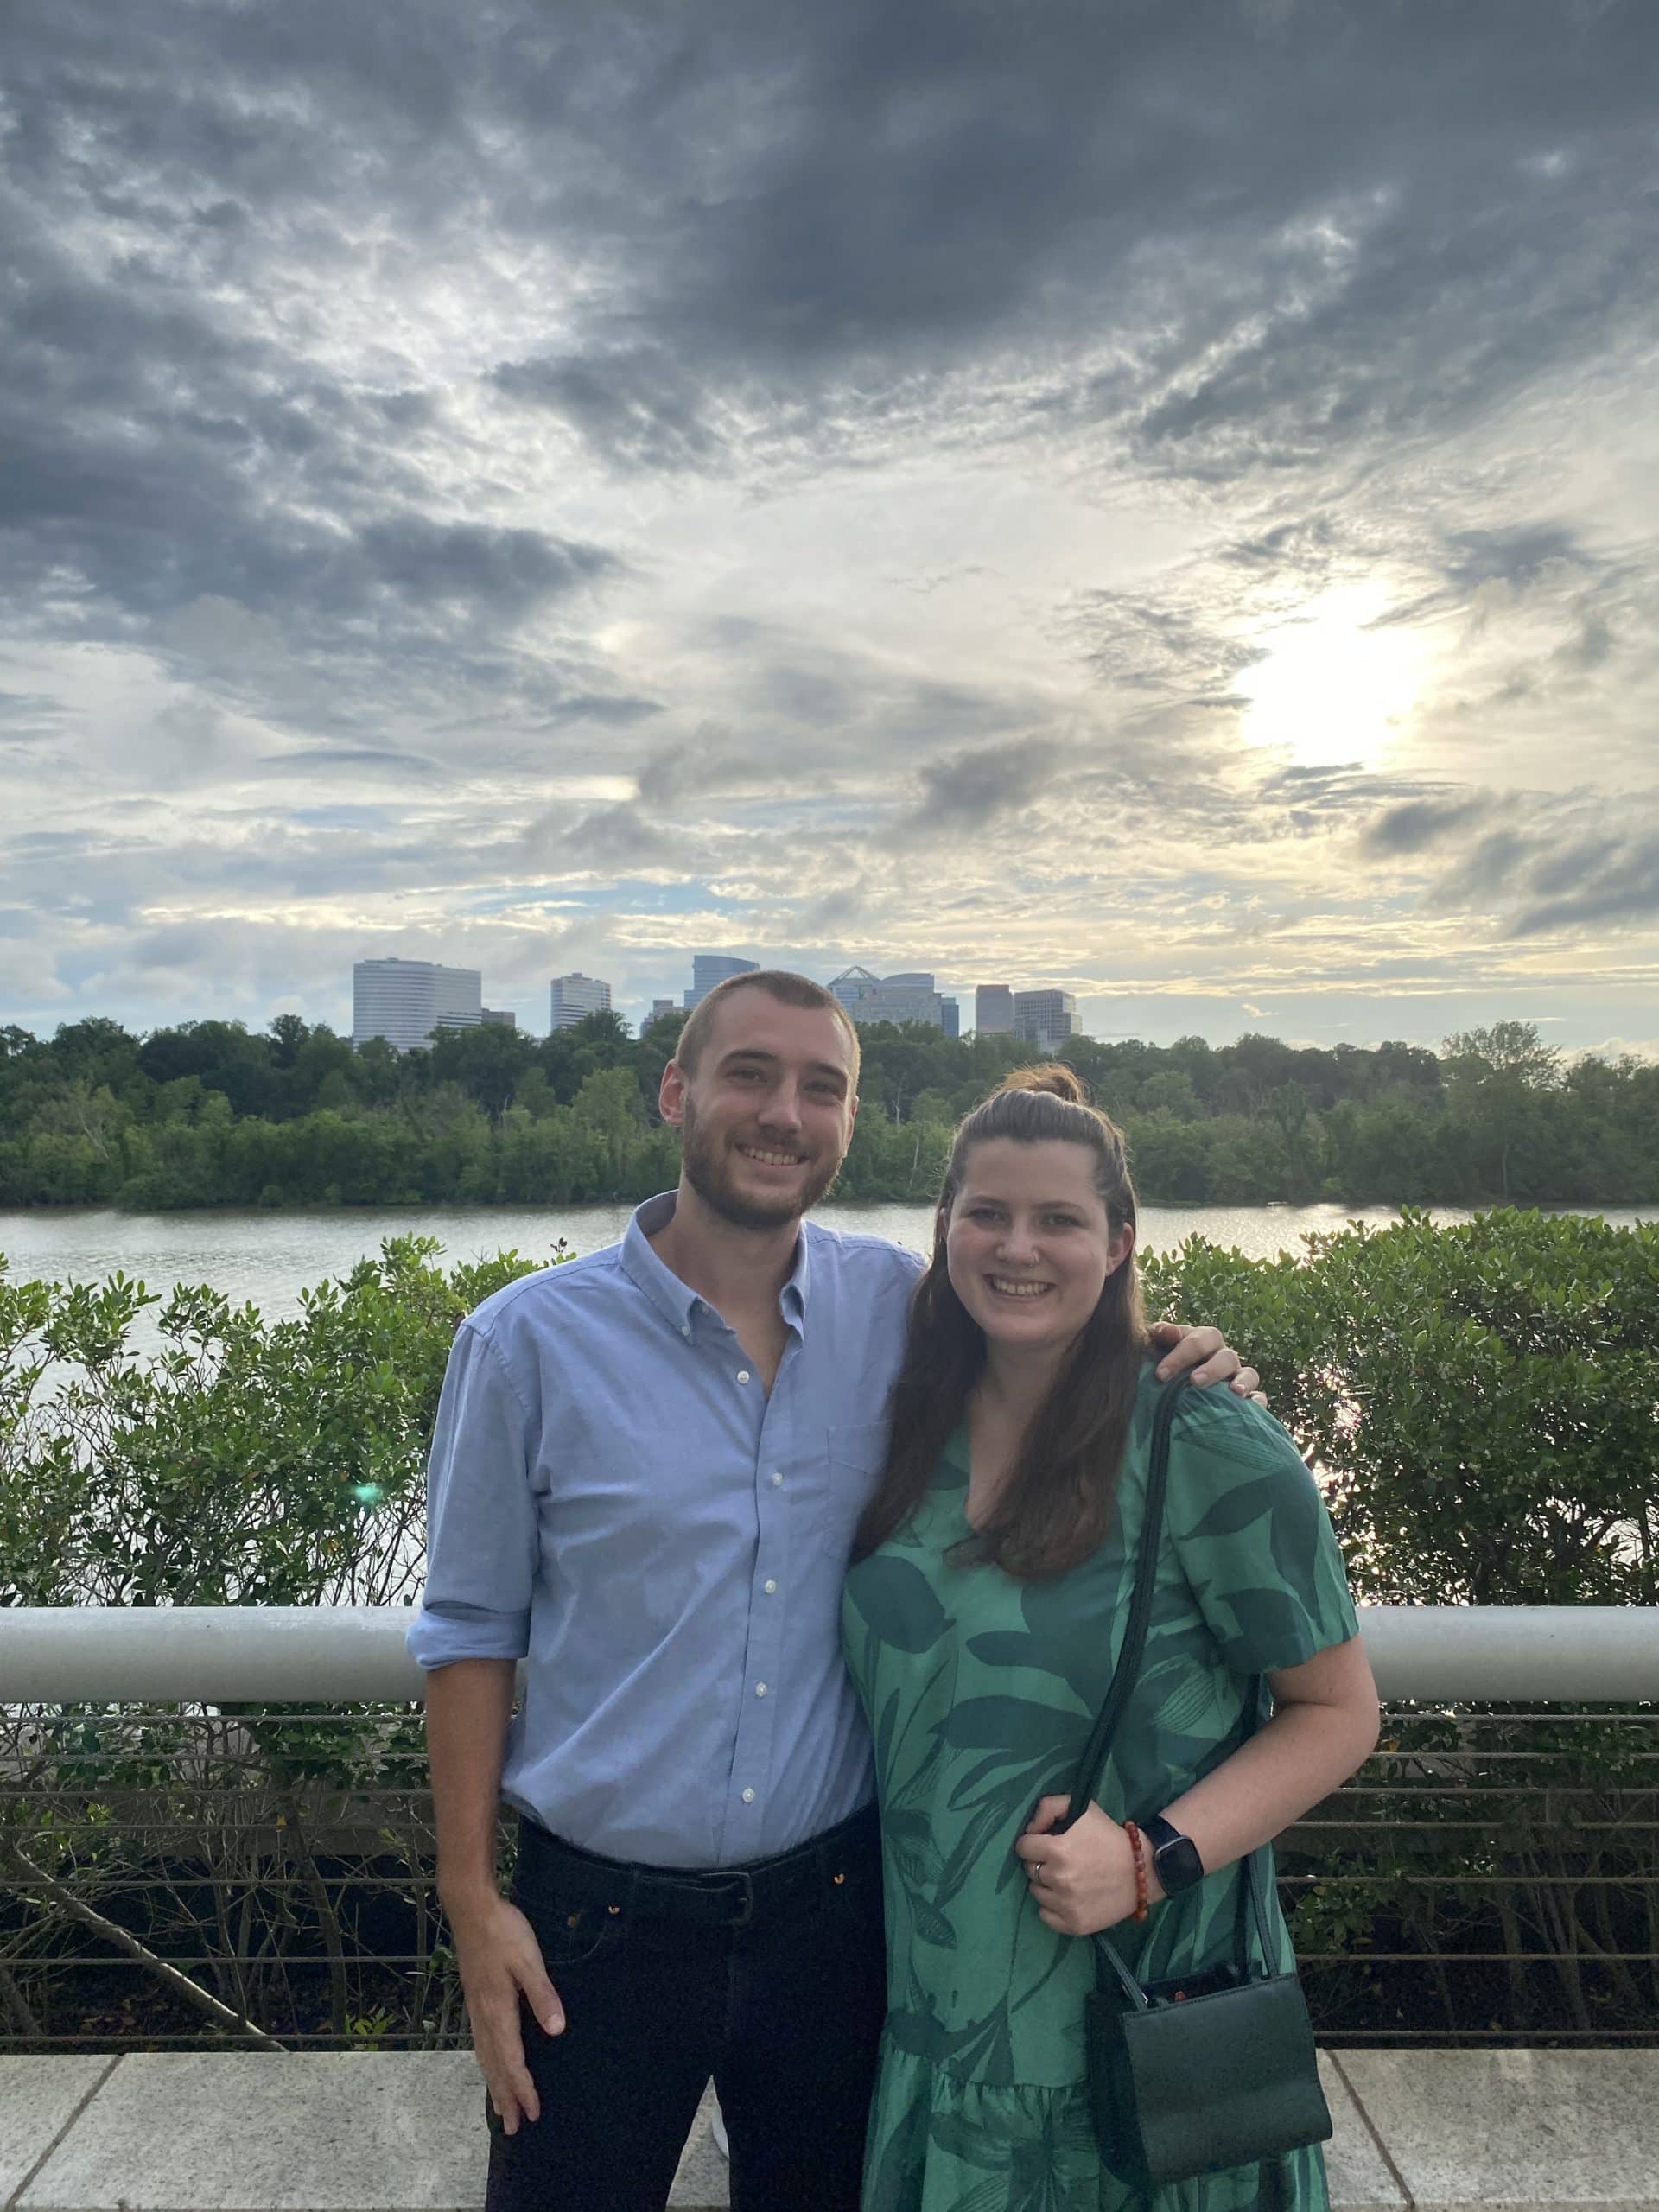 Samuel and his girlfriend in front of a river with a city skyline on the other side